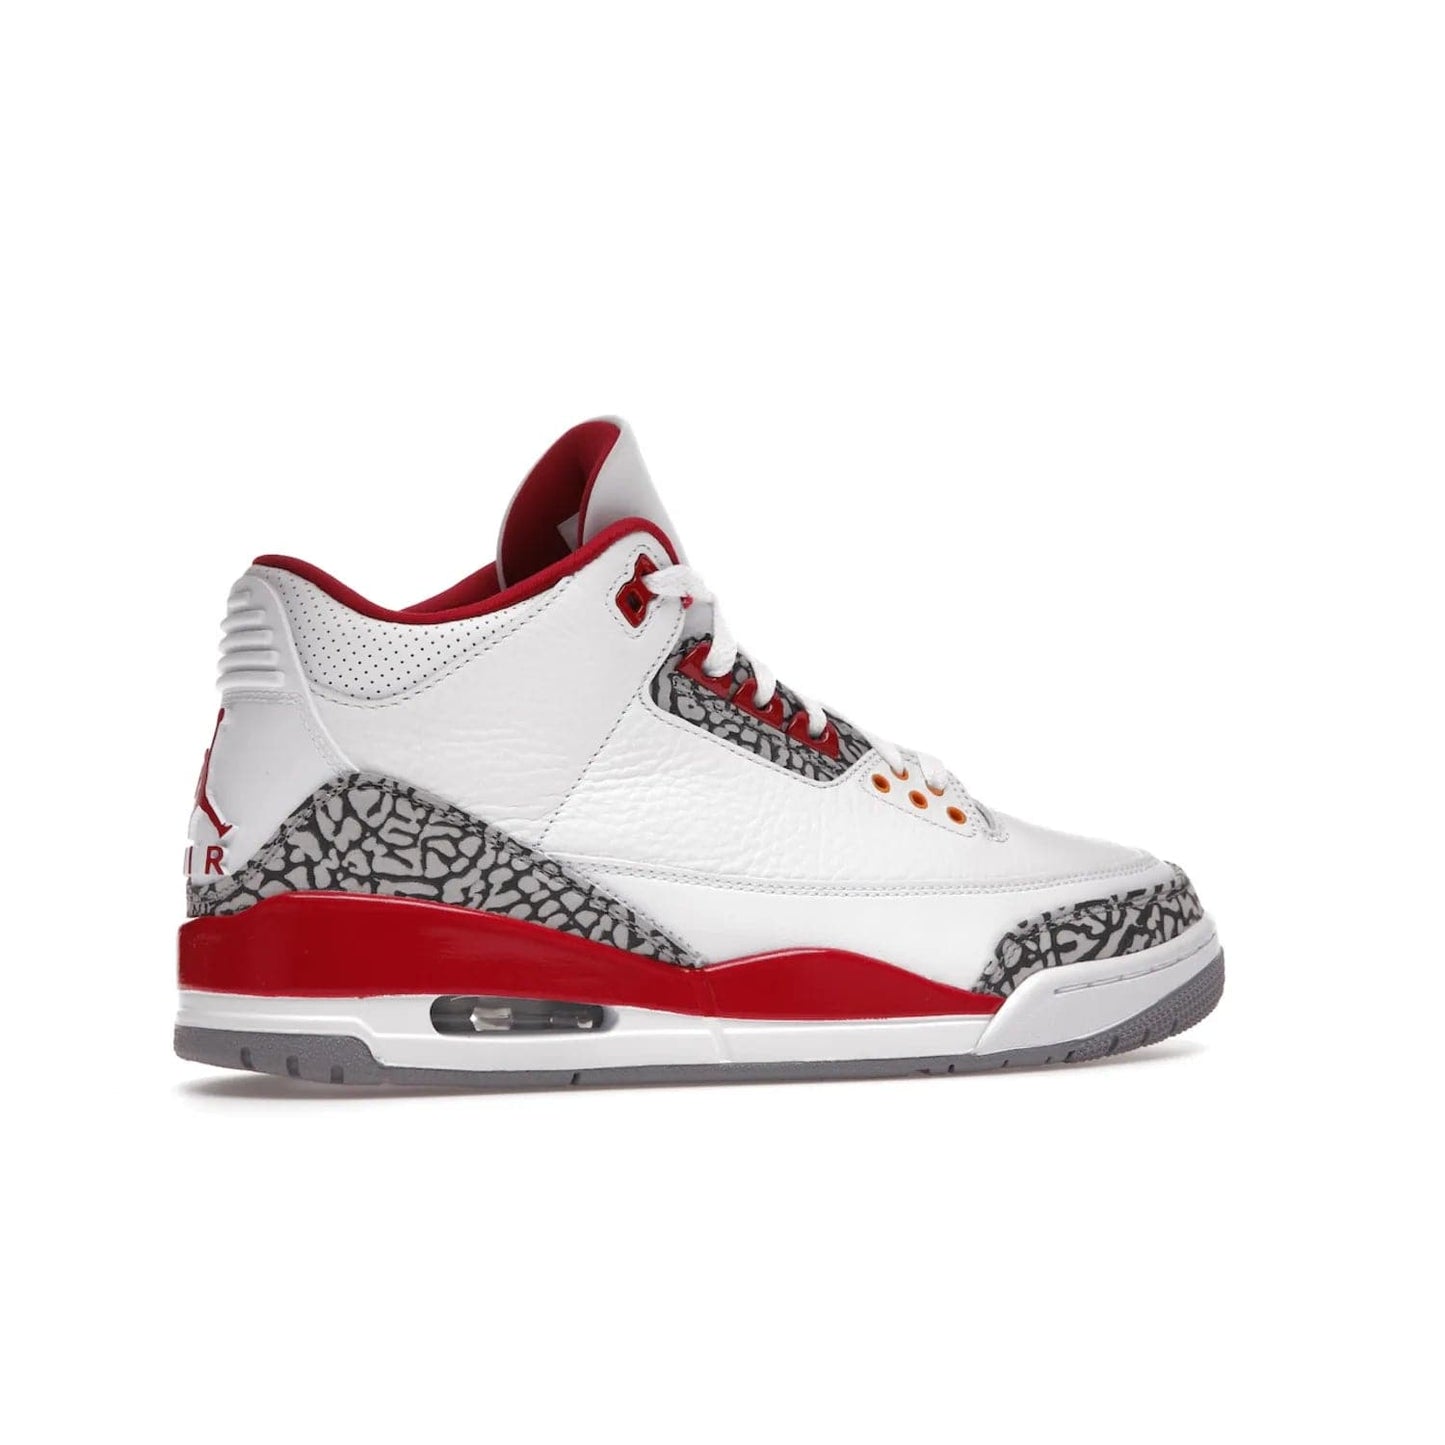 Jordan 3 Retro Cardinal Red - Image 35 - Only at www.BallersClubKickz.com - Air Jordan 3 Retro Cardinal Red combines classic style and modern appeal - white tumbled leather, signature Elephant Print overlays, cardinal red midsoles, Jumpman logo embroidery. Available Feb 2022.